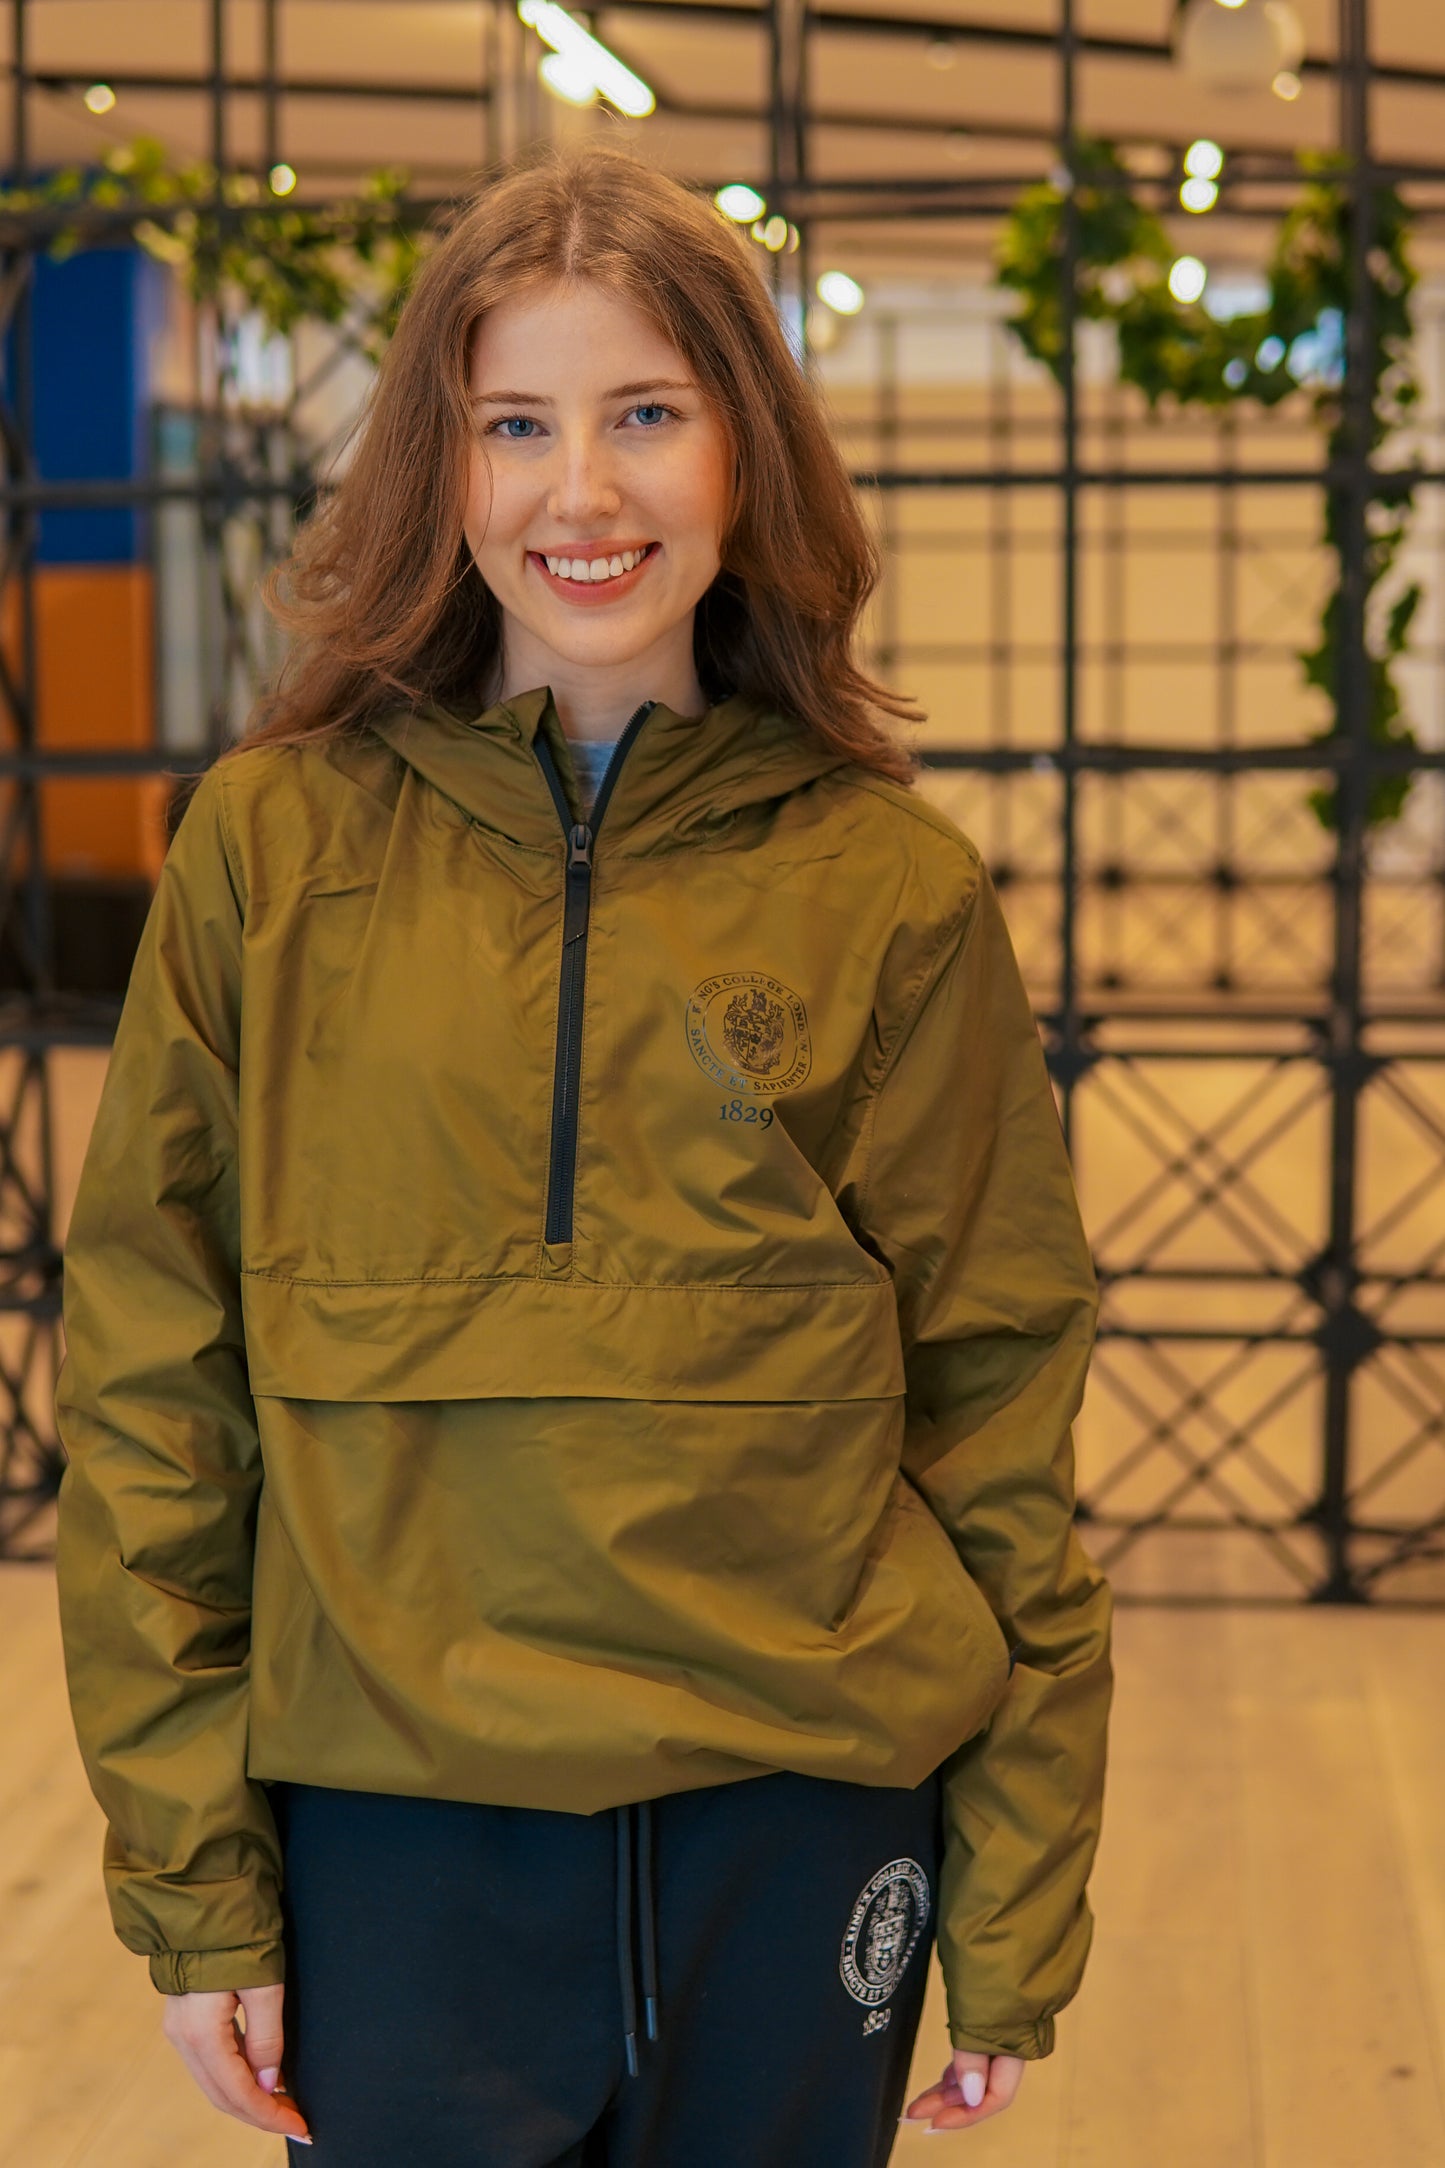 King's College London Over Head Jacket in Khaki